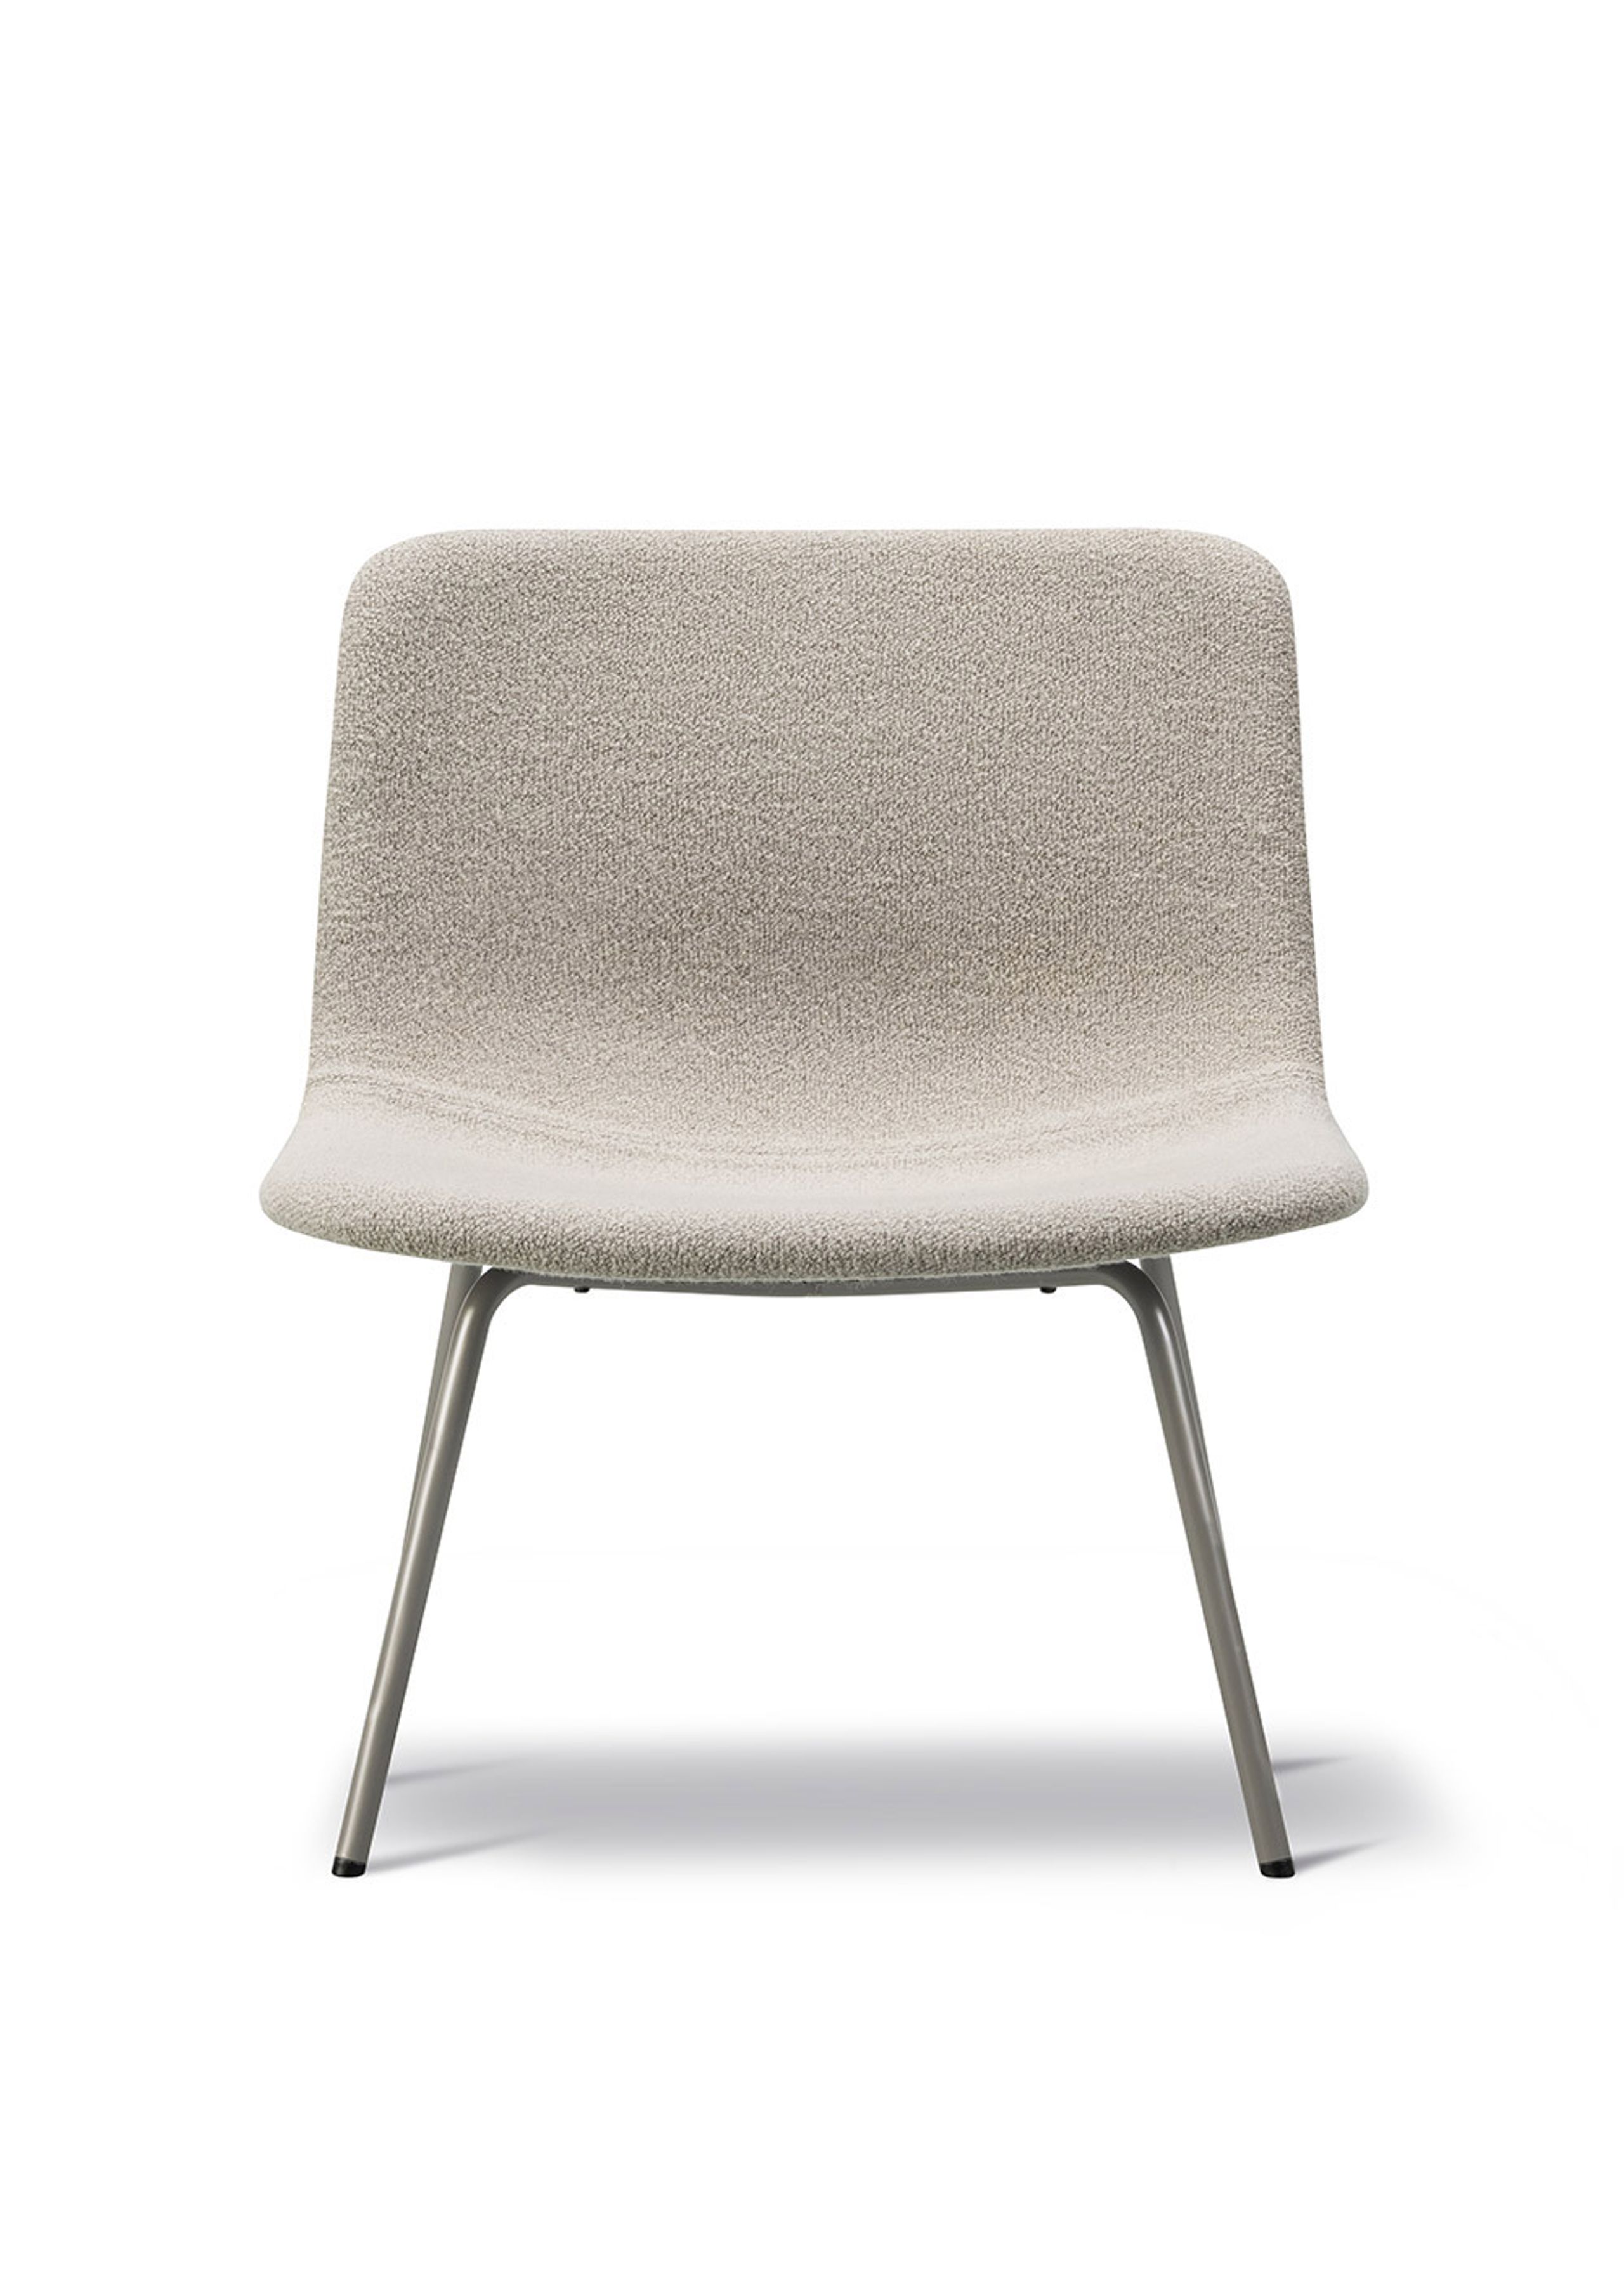 Fredericia Furniture - Lounge chair - Pato 4 Leg Lounge Chair 4362 by Welling/Ludvik - Carlotto 200